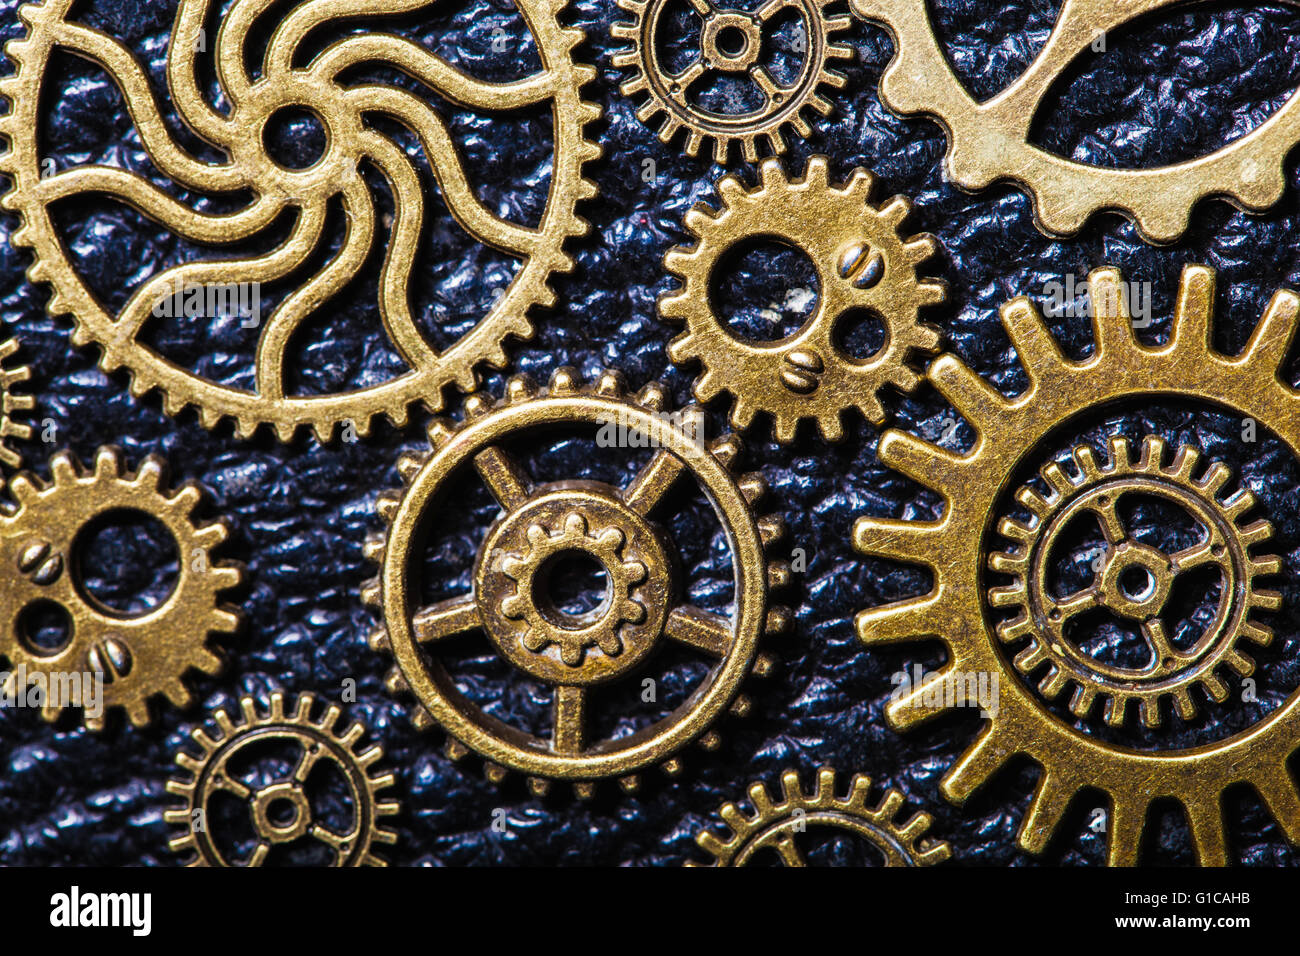 steampunk mechanical cogs gears wheels on leather background Stock